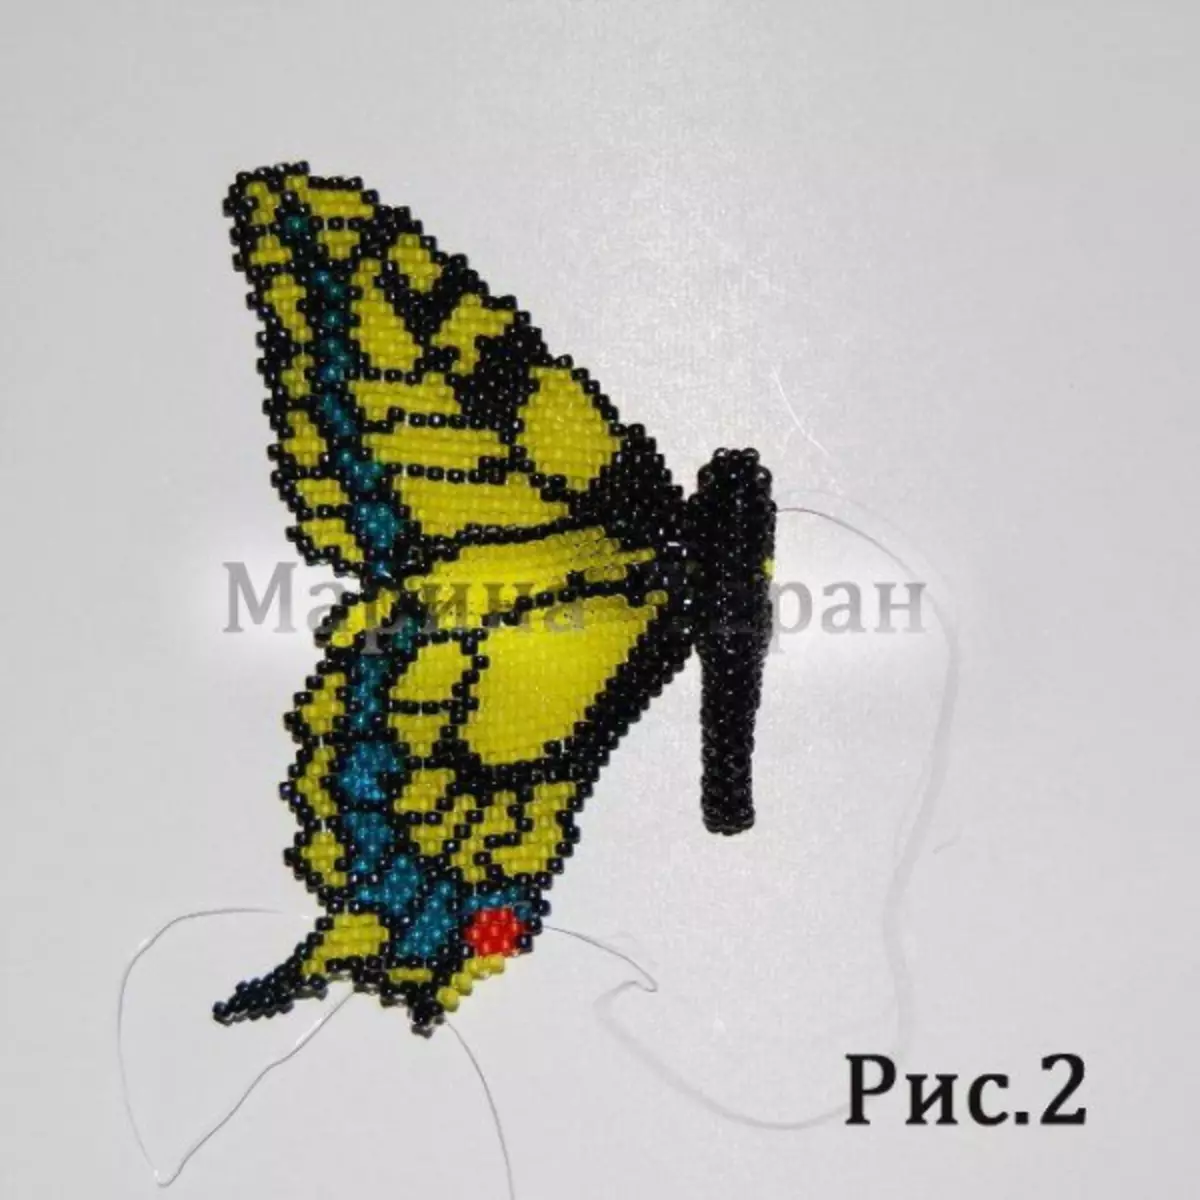 How to make a butterfly from beads: step-by-step instructions with photos and videos